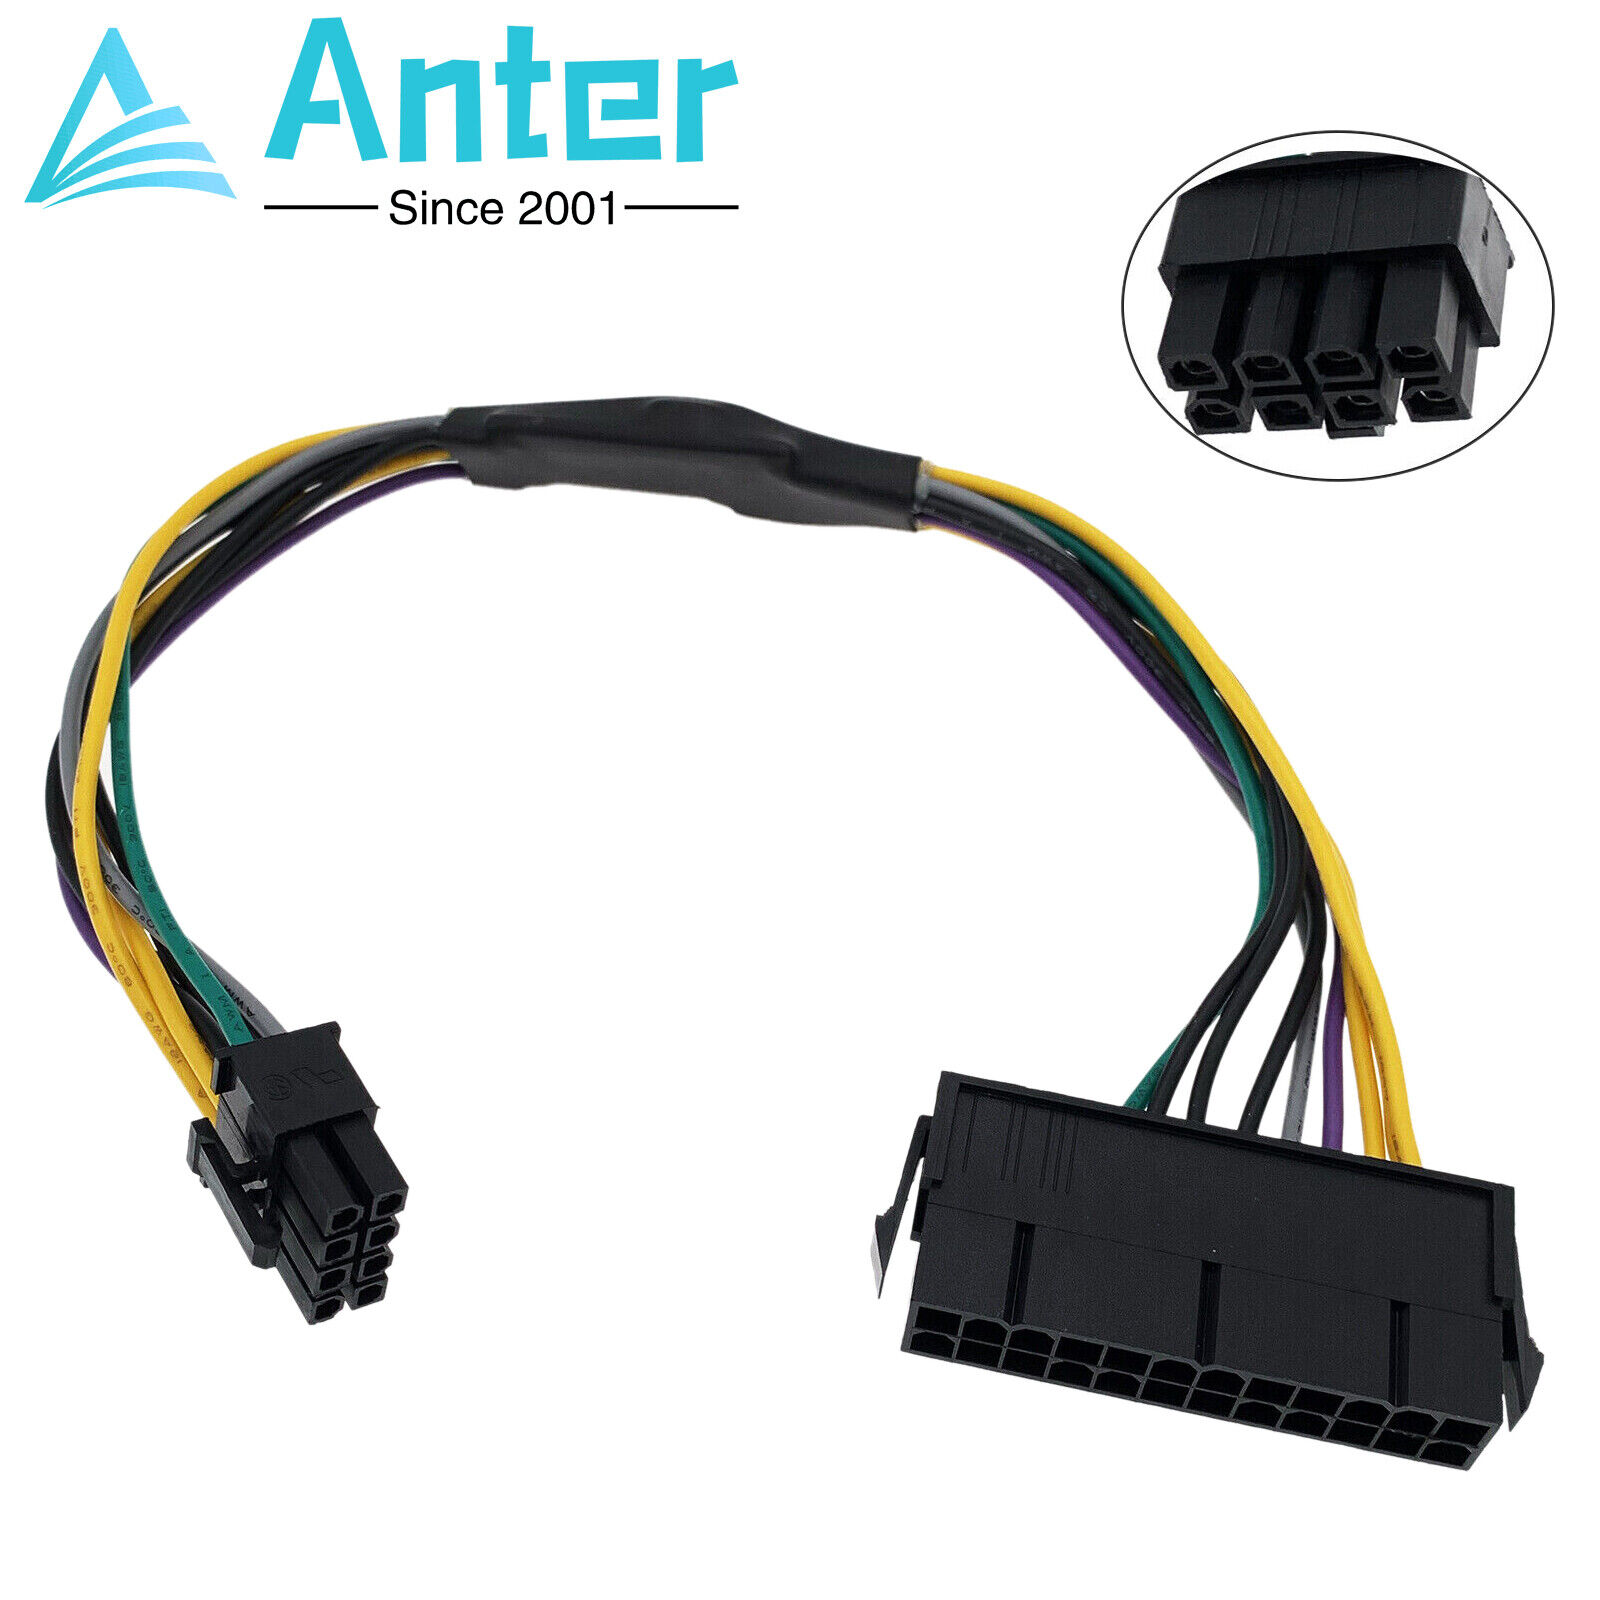 24-Pin to 8-Pin ATX Power Adapter Cable for Dell Optiplex 3040/3046/5040/7060